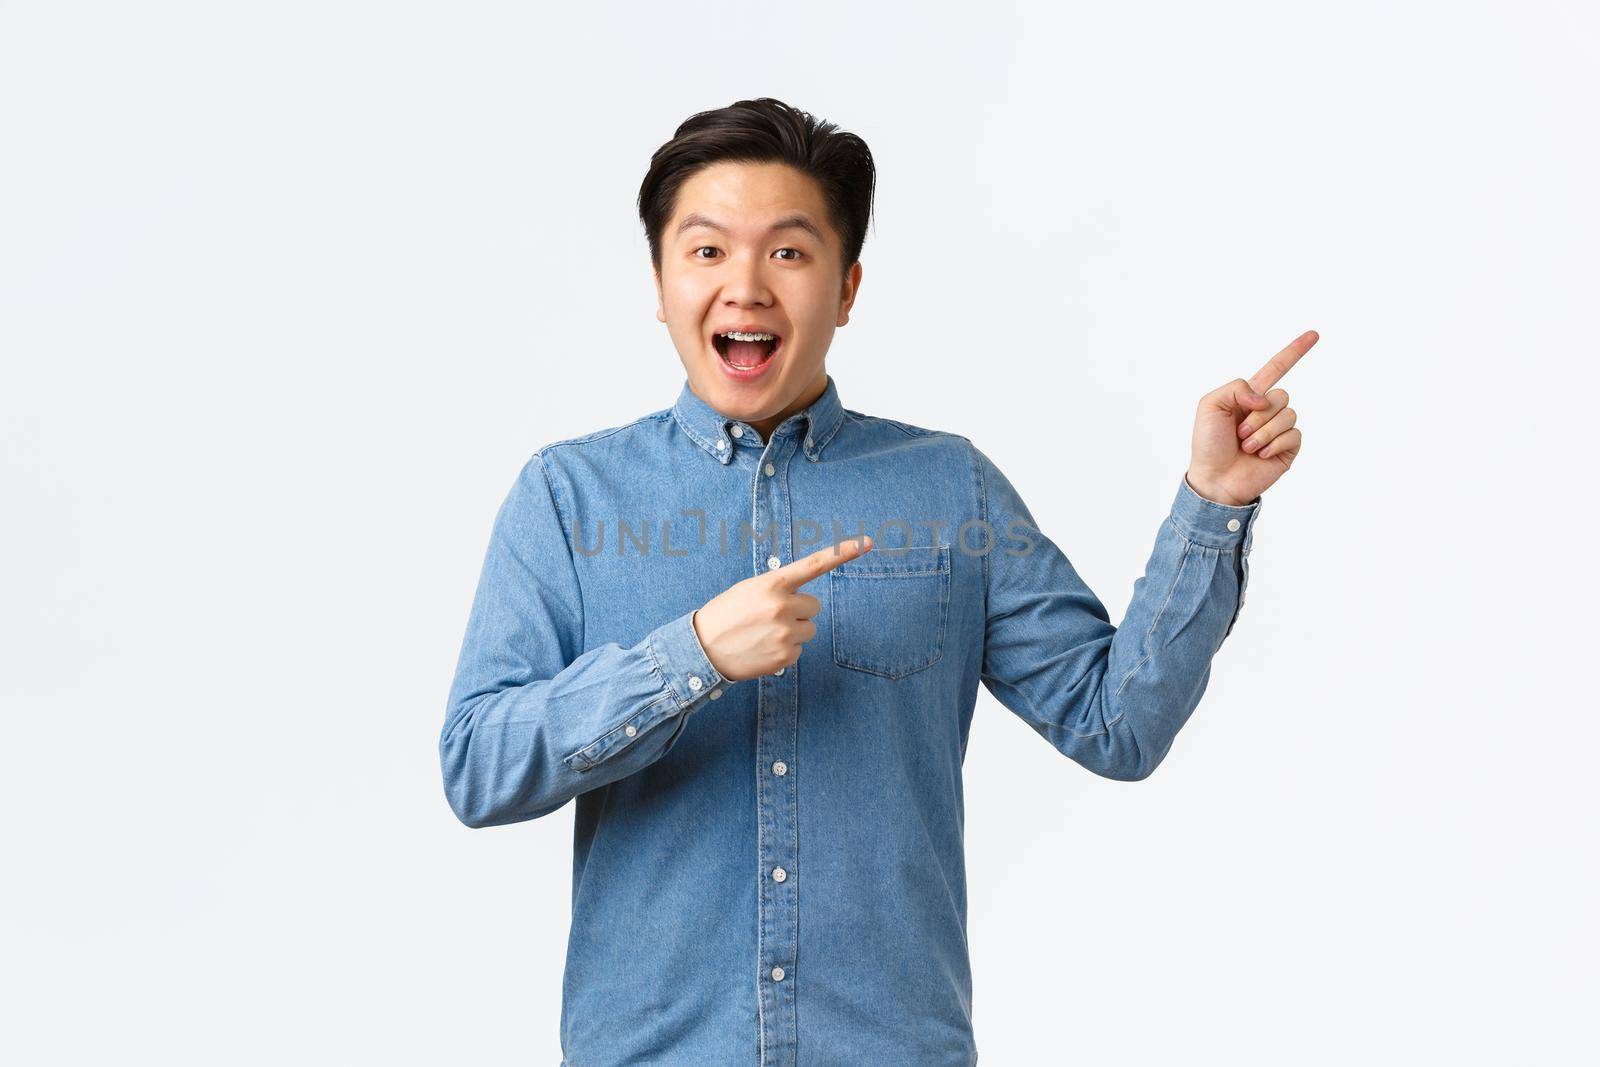 Excited and happy asian man making big announcement. Guy with braces smiling amused and pointing fingers upper right corner. Male student showing courses or online link, white background.